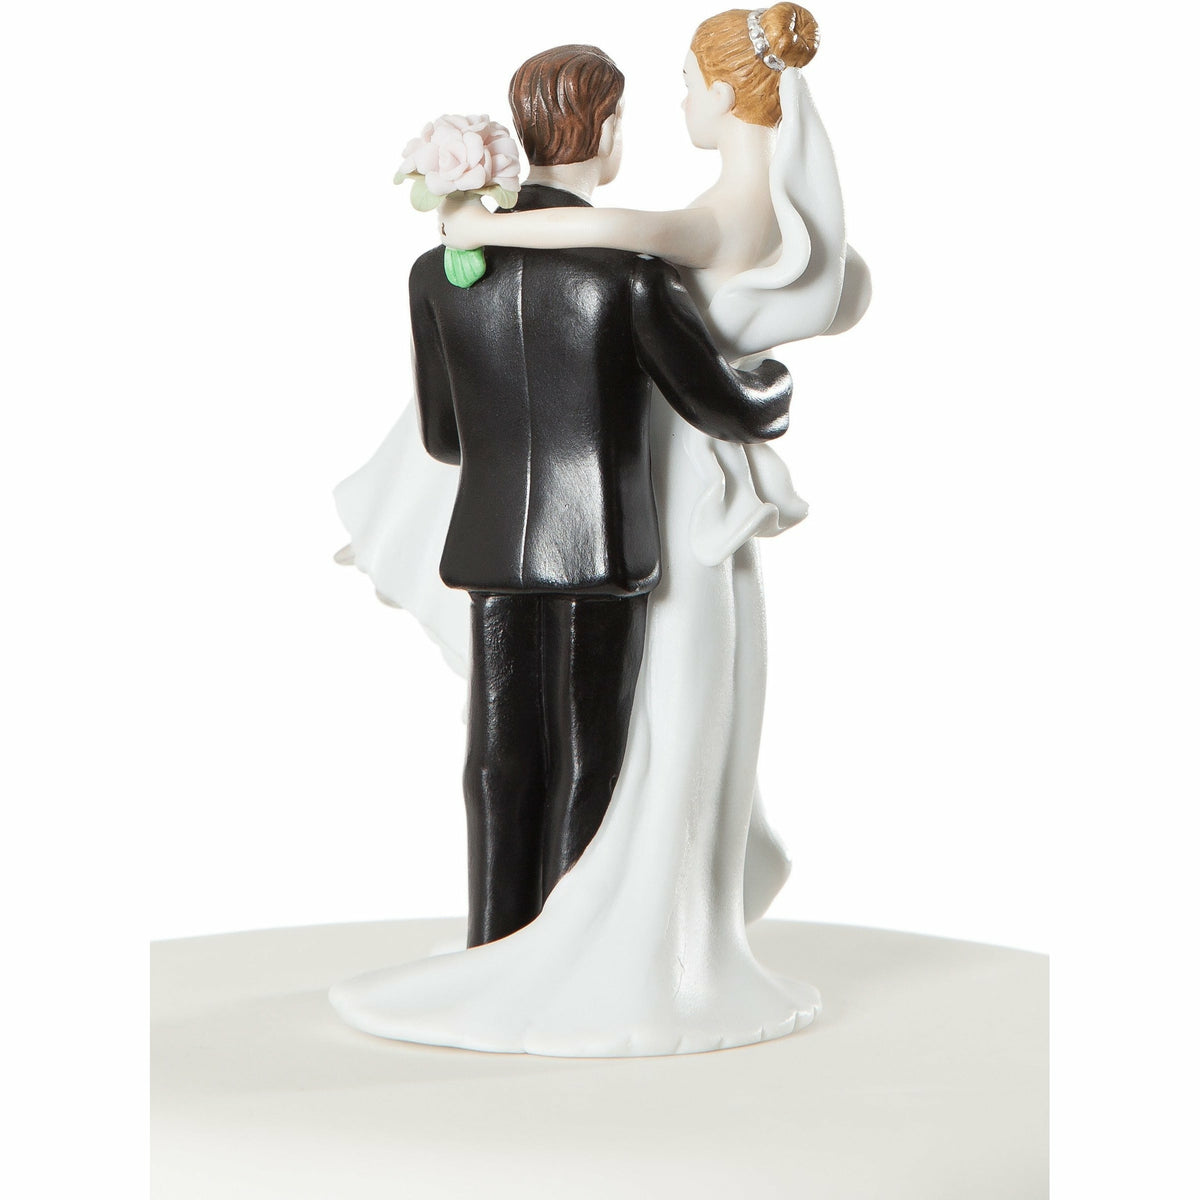 Small Groom Holding Bride Traditional Cake Topper Figurine Wedding